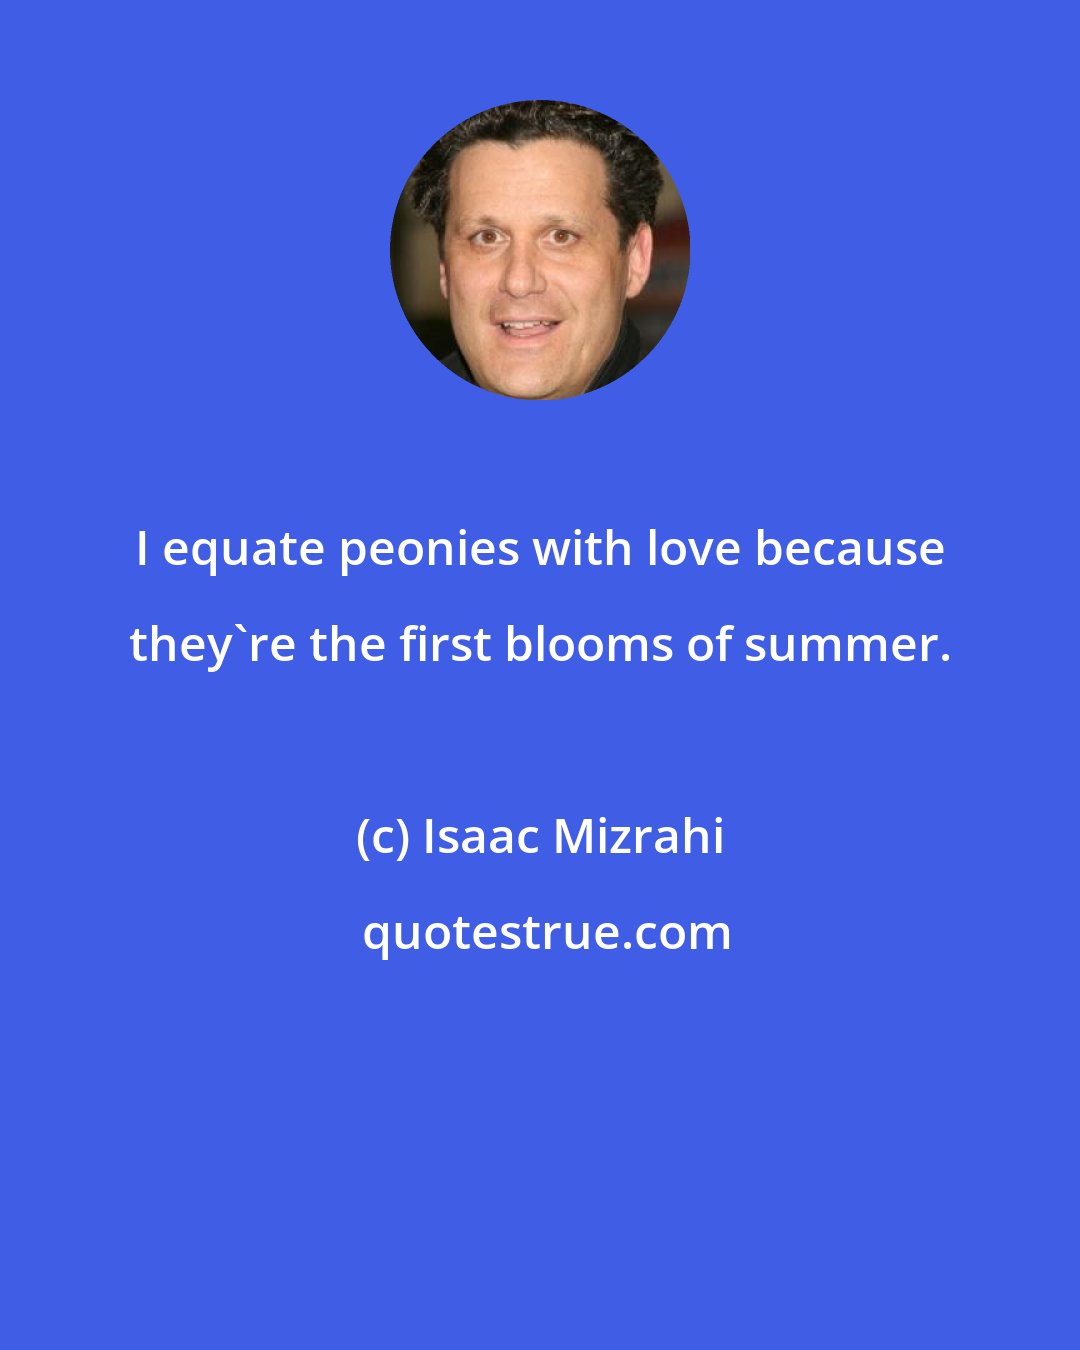 Isaac Mizrahi: I equate peonies with love because they're the first blooms of summer.